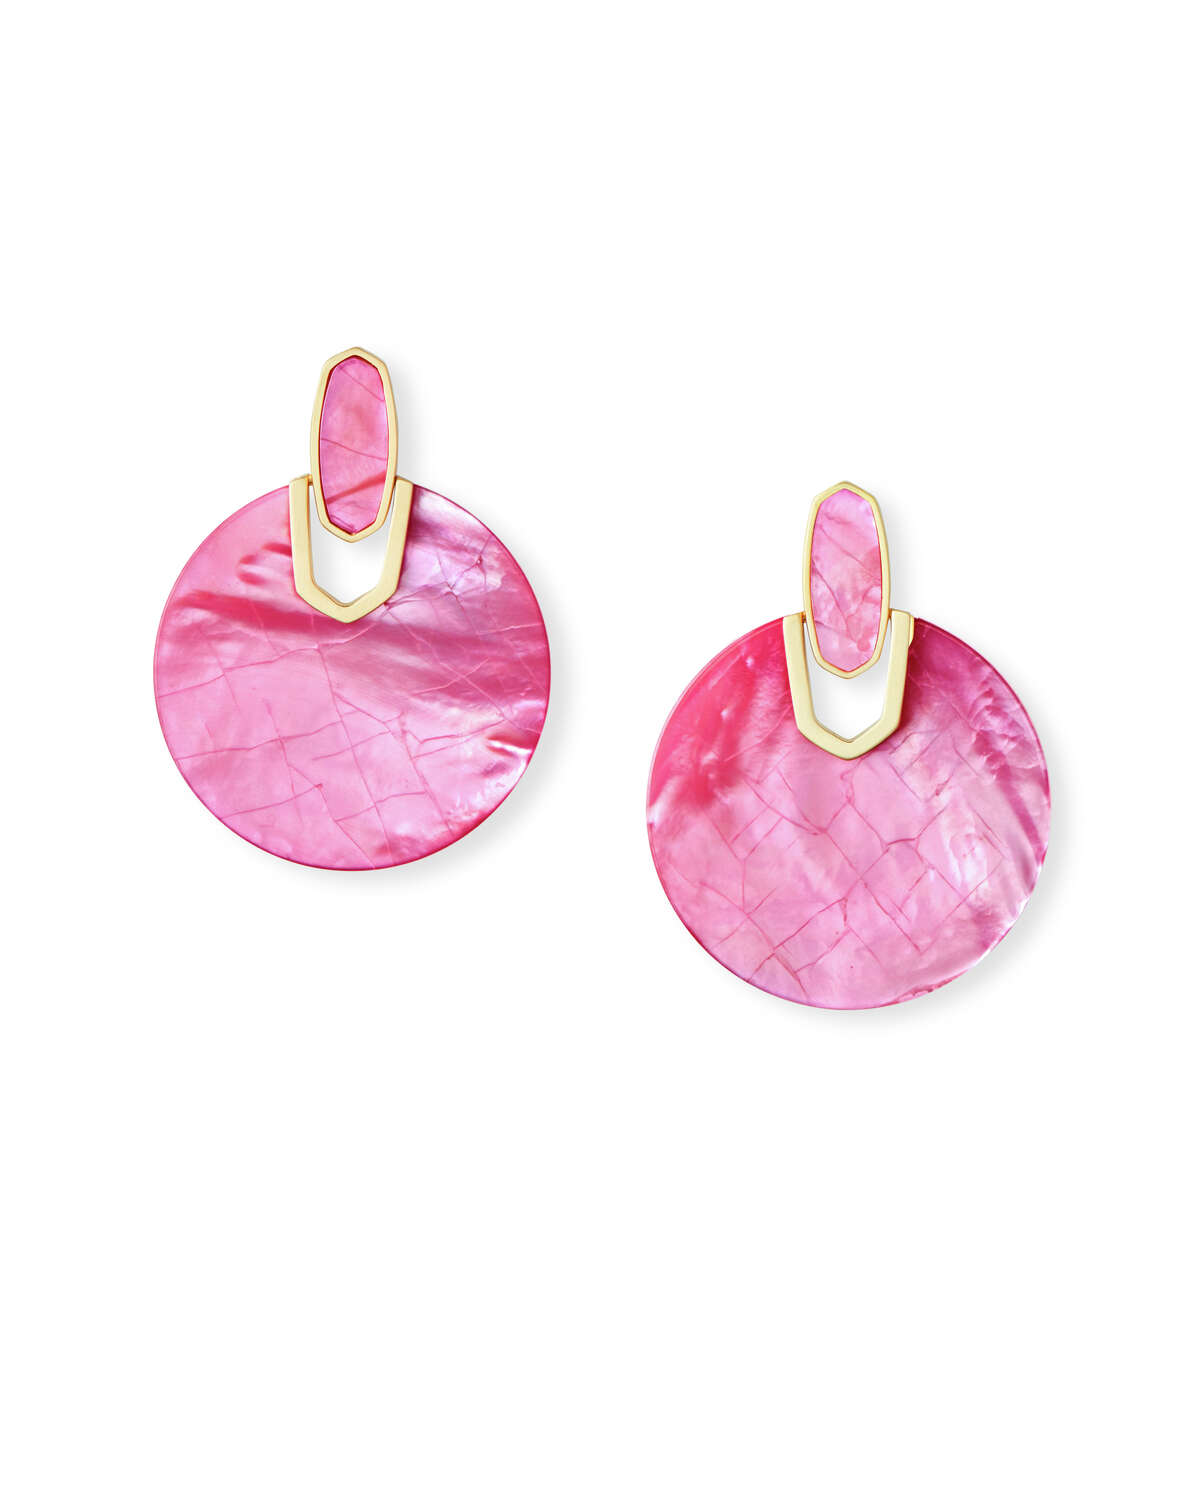 Texas jewelry mogul Kendra Scott pays homage to Lone Star State with ...